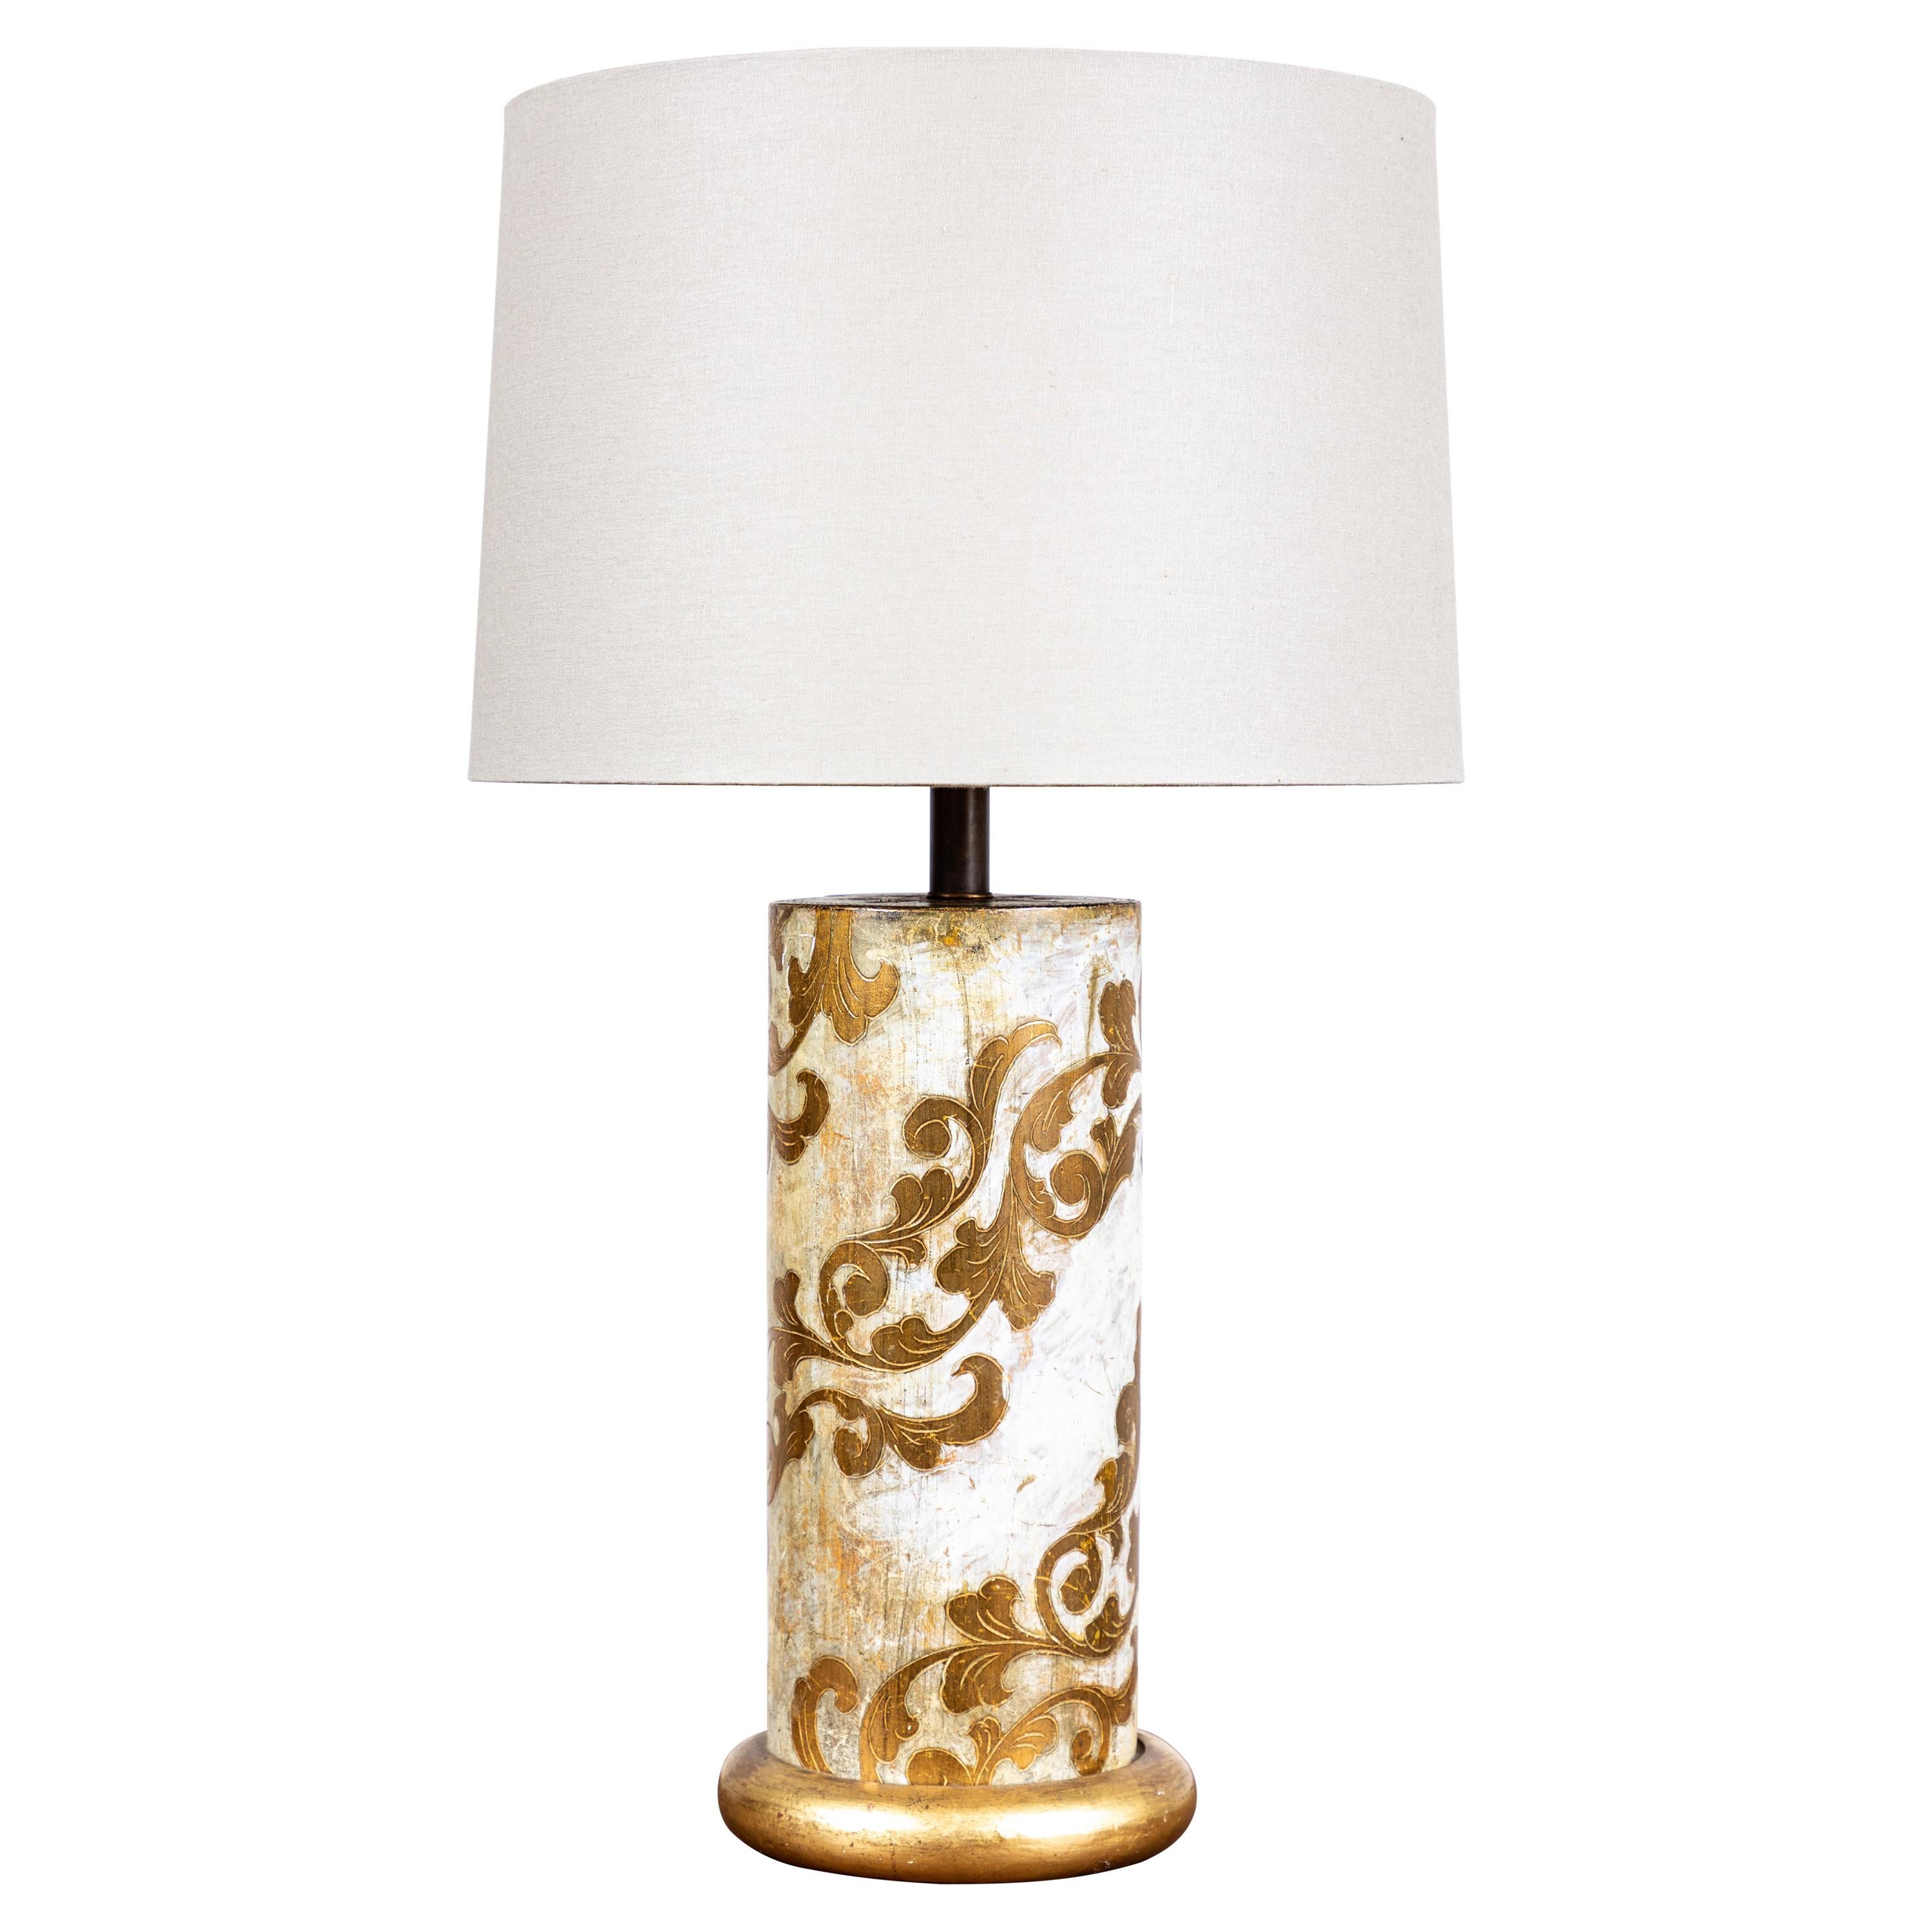 Vintage Itailan Giltwood Table Lamp For Sale